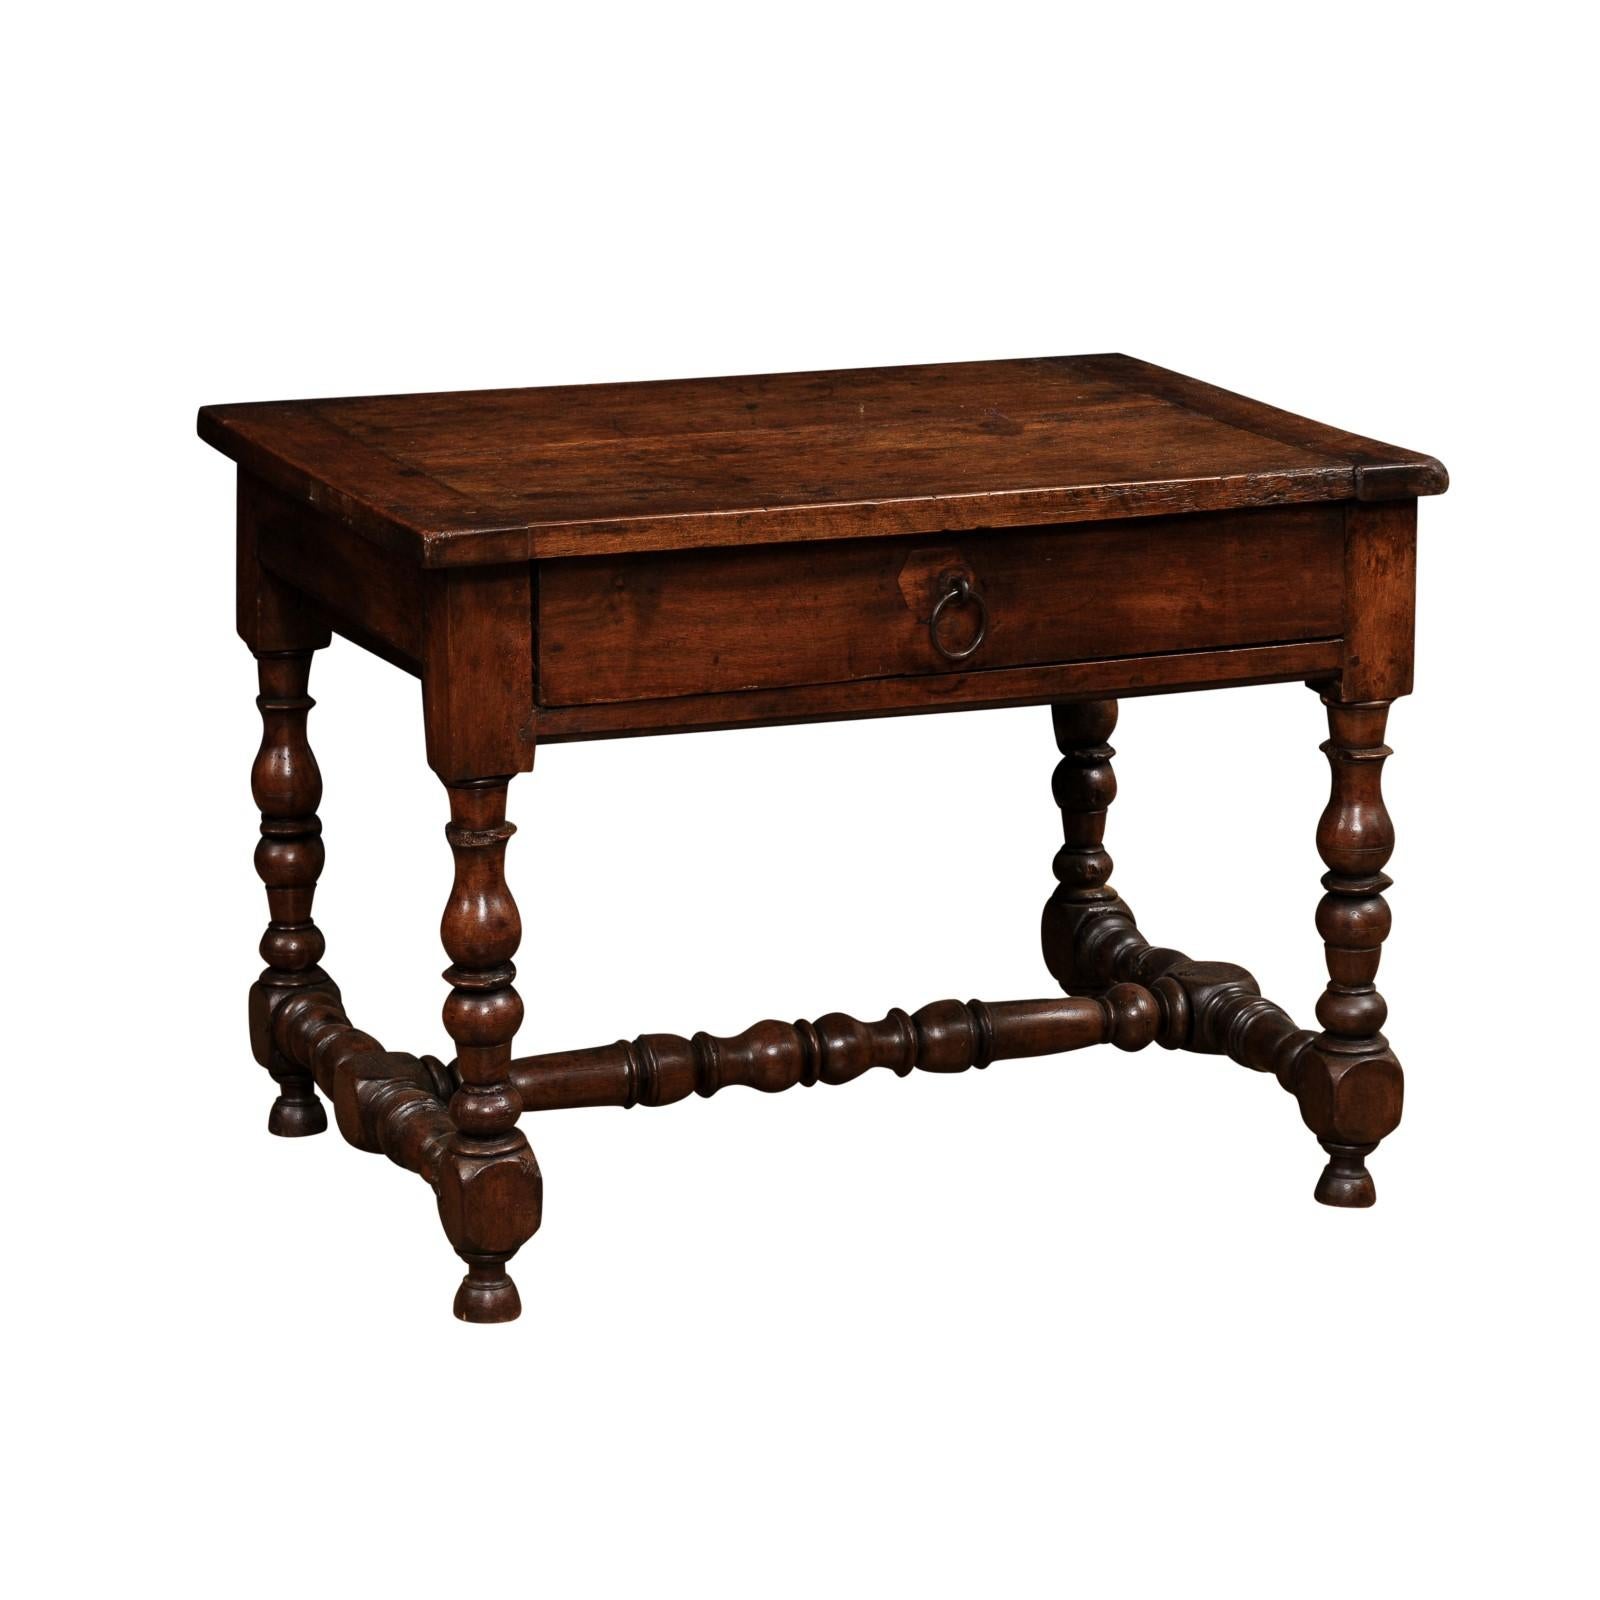 A French Louis XIII period walnut side table from the mid 17th century, with single drawer, turned baluster legs and H-Form stretcher. Created in France during the second quarter of the 17th century, this walnut side table features a rectangular